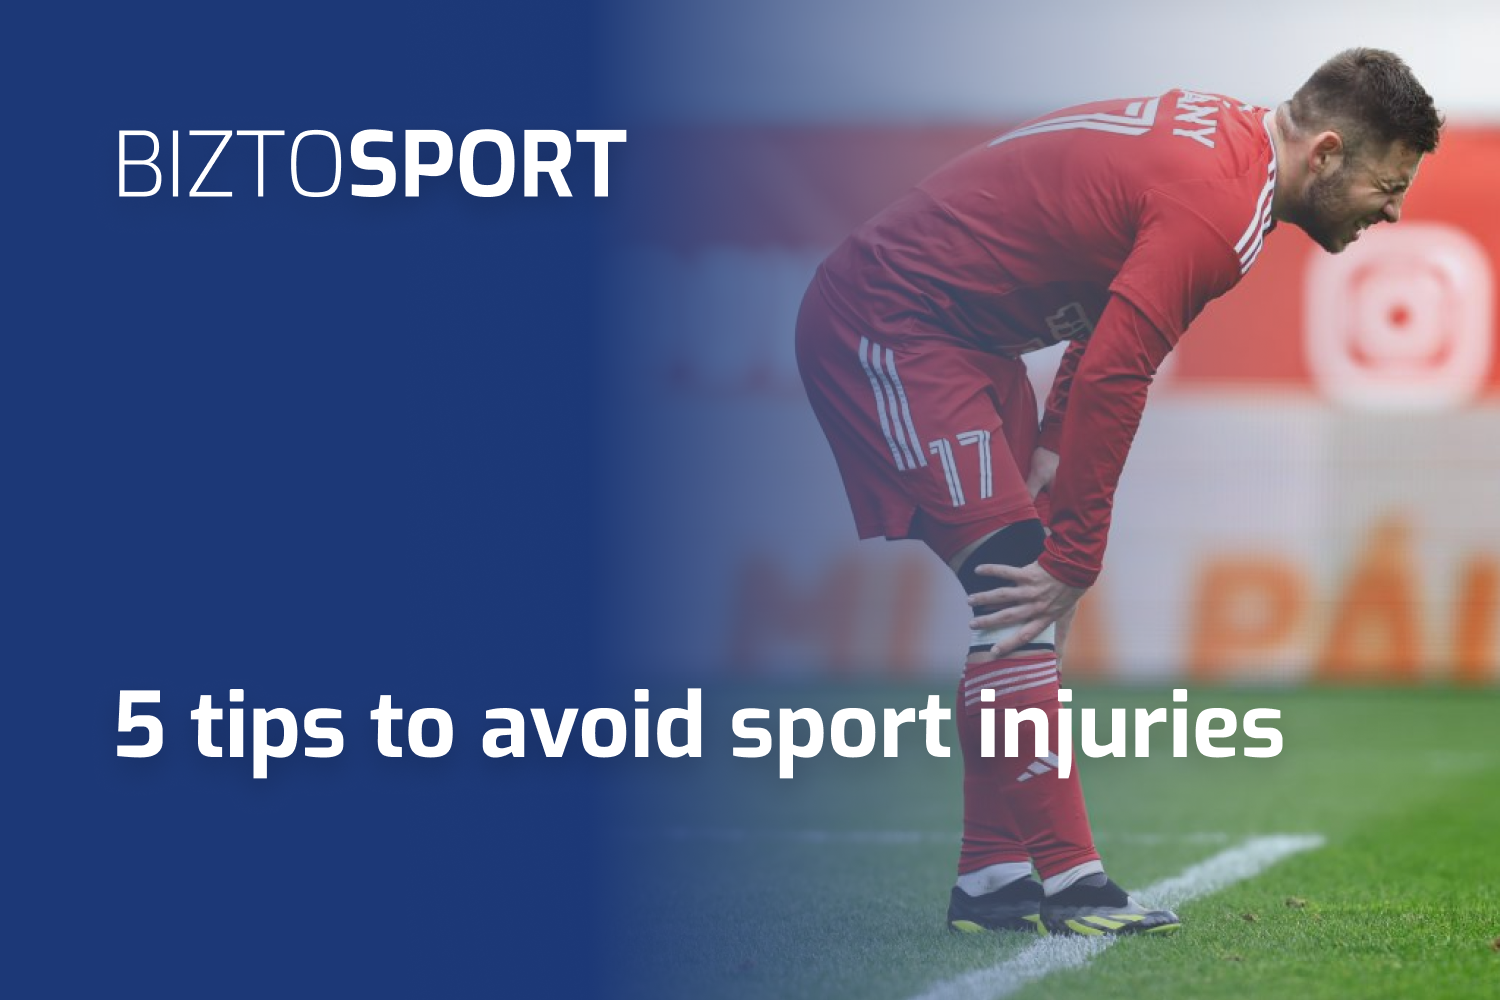 5 tips to avoid sport injuries